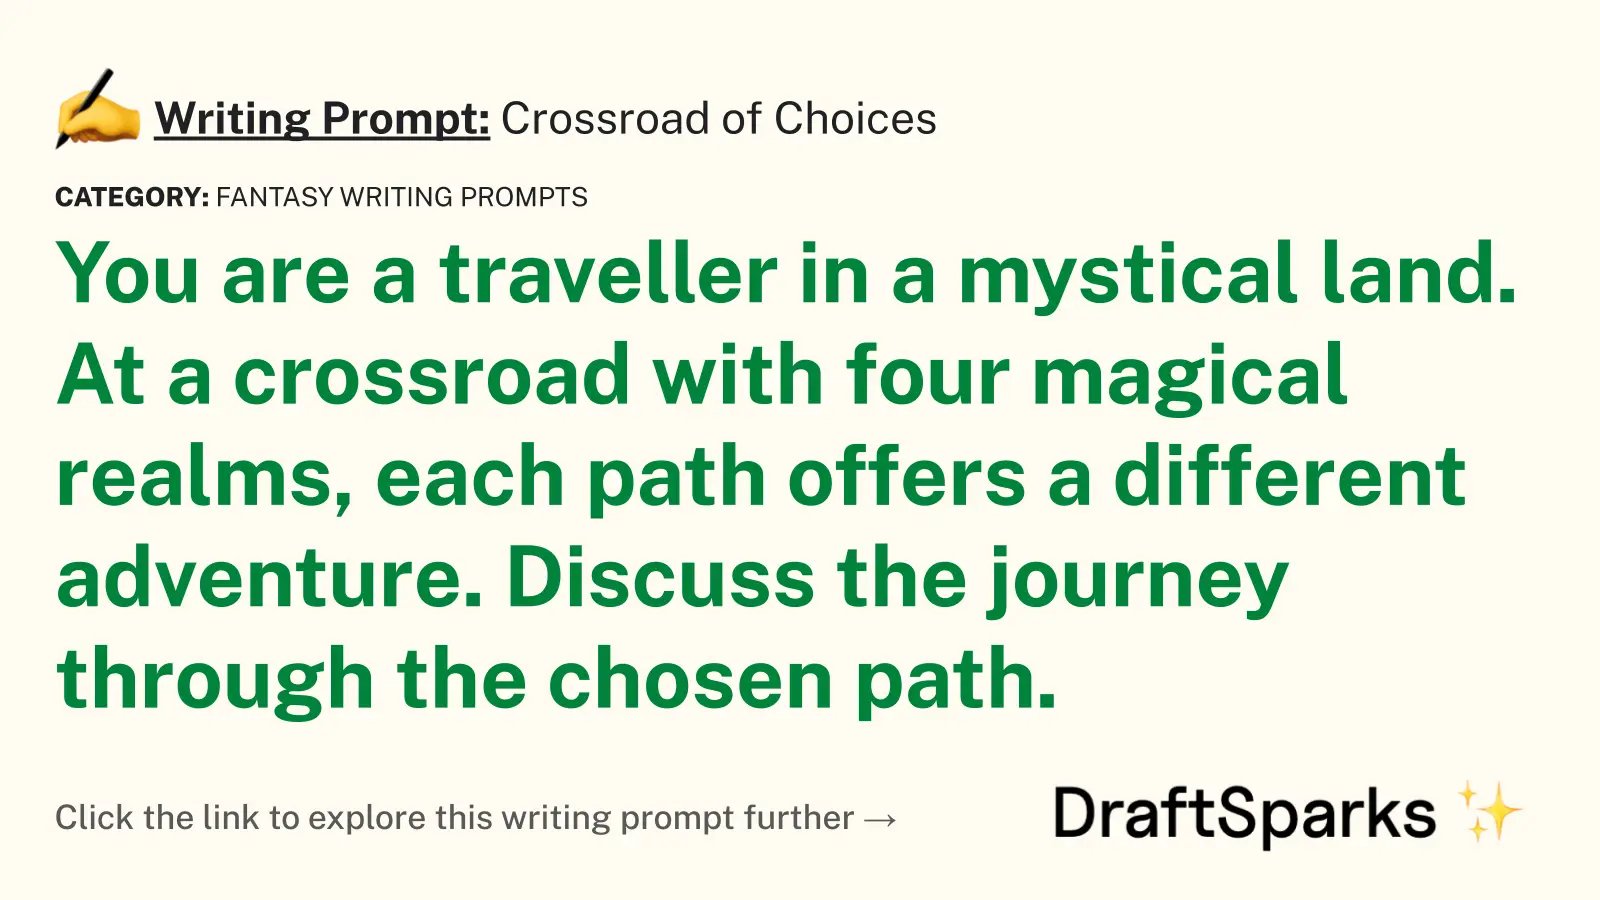 Crossroad of Choices